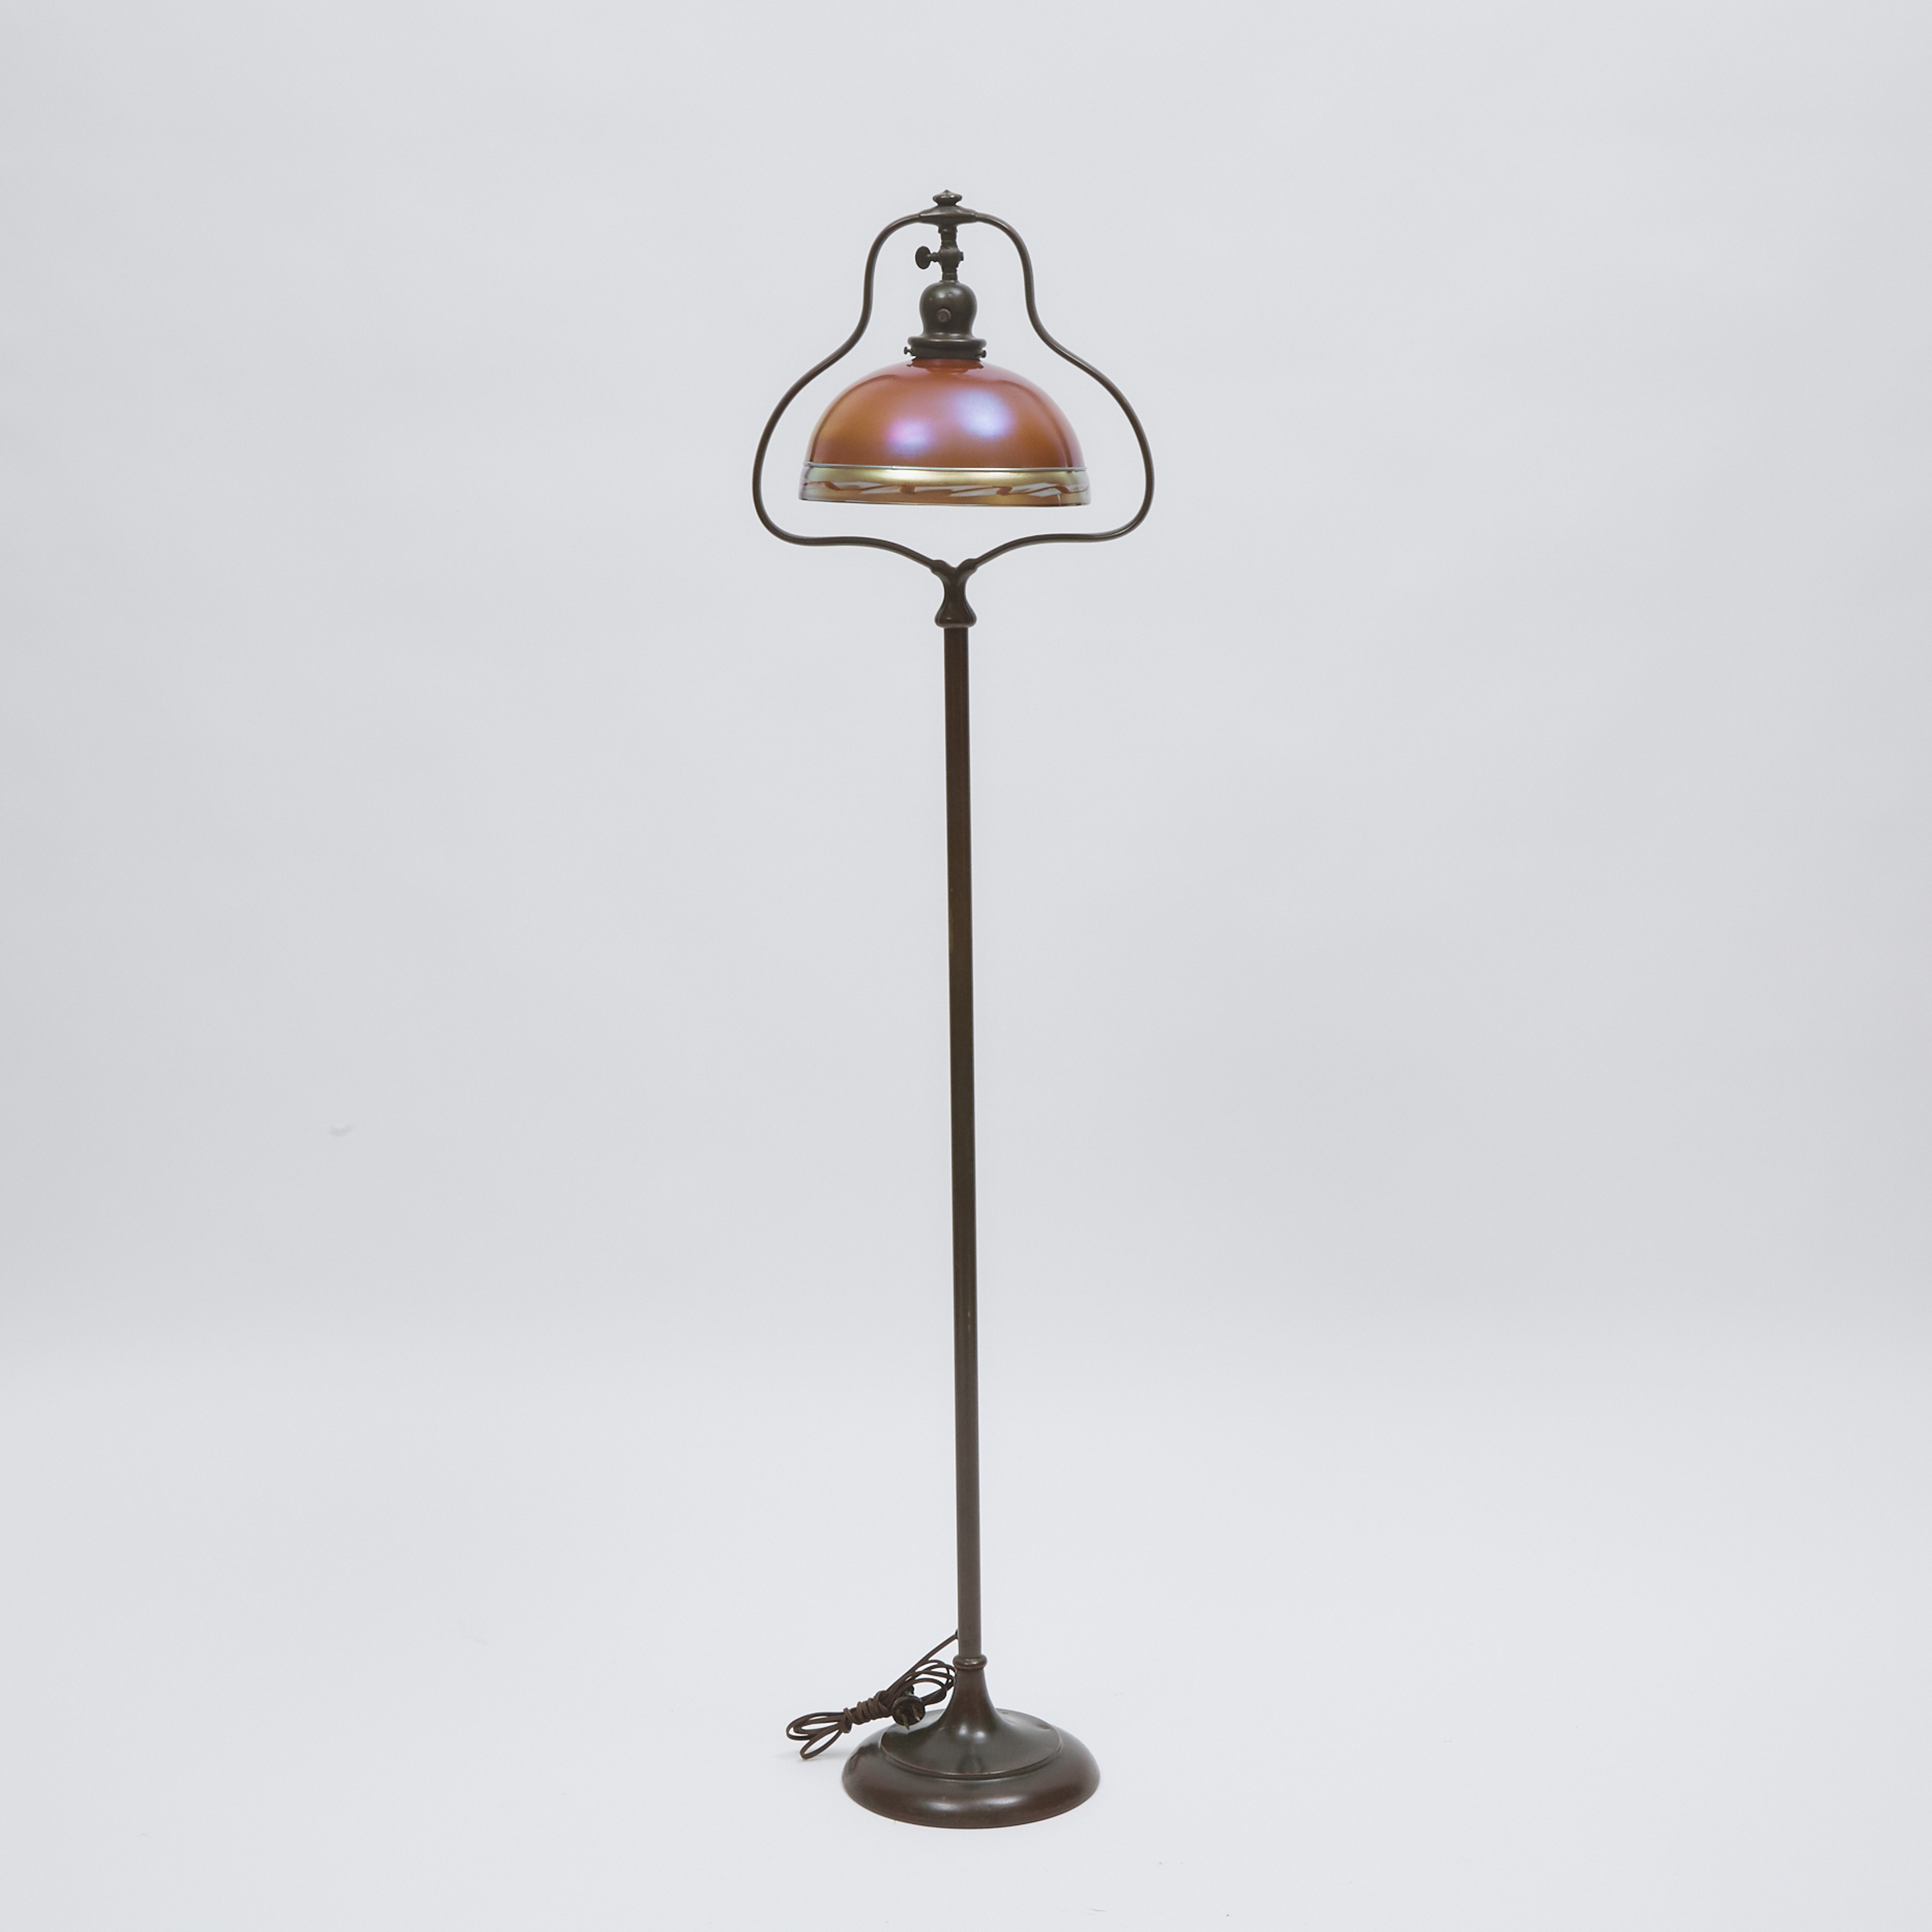 Handel Bronze Floor Lamp with a Steuben Glass Shade, early 20th century